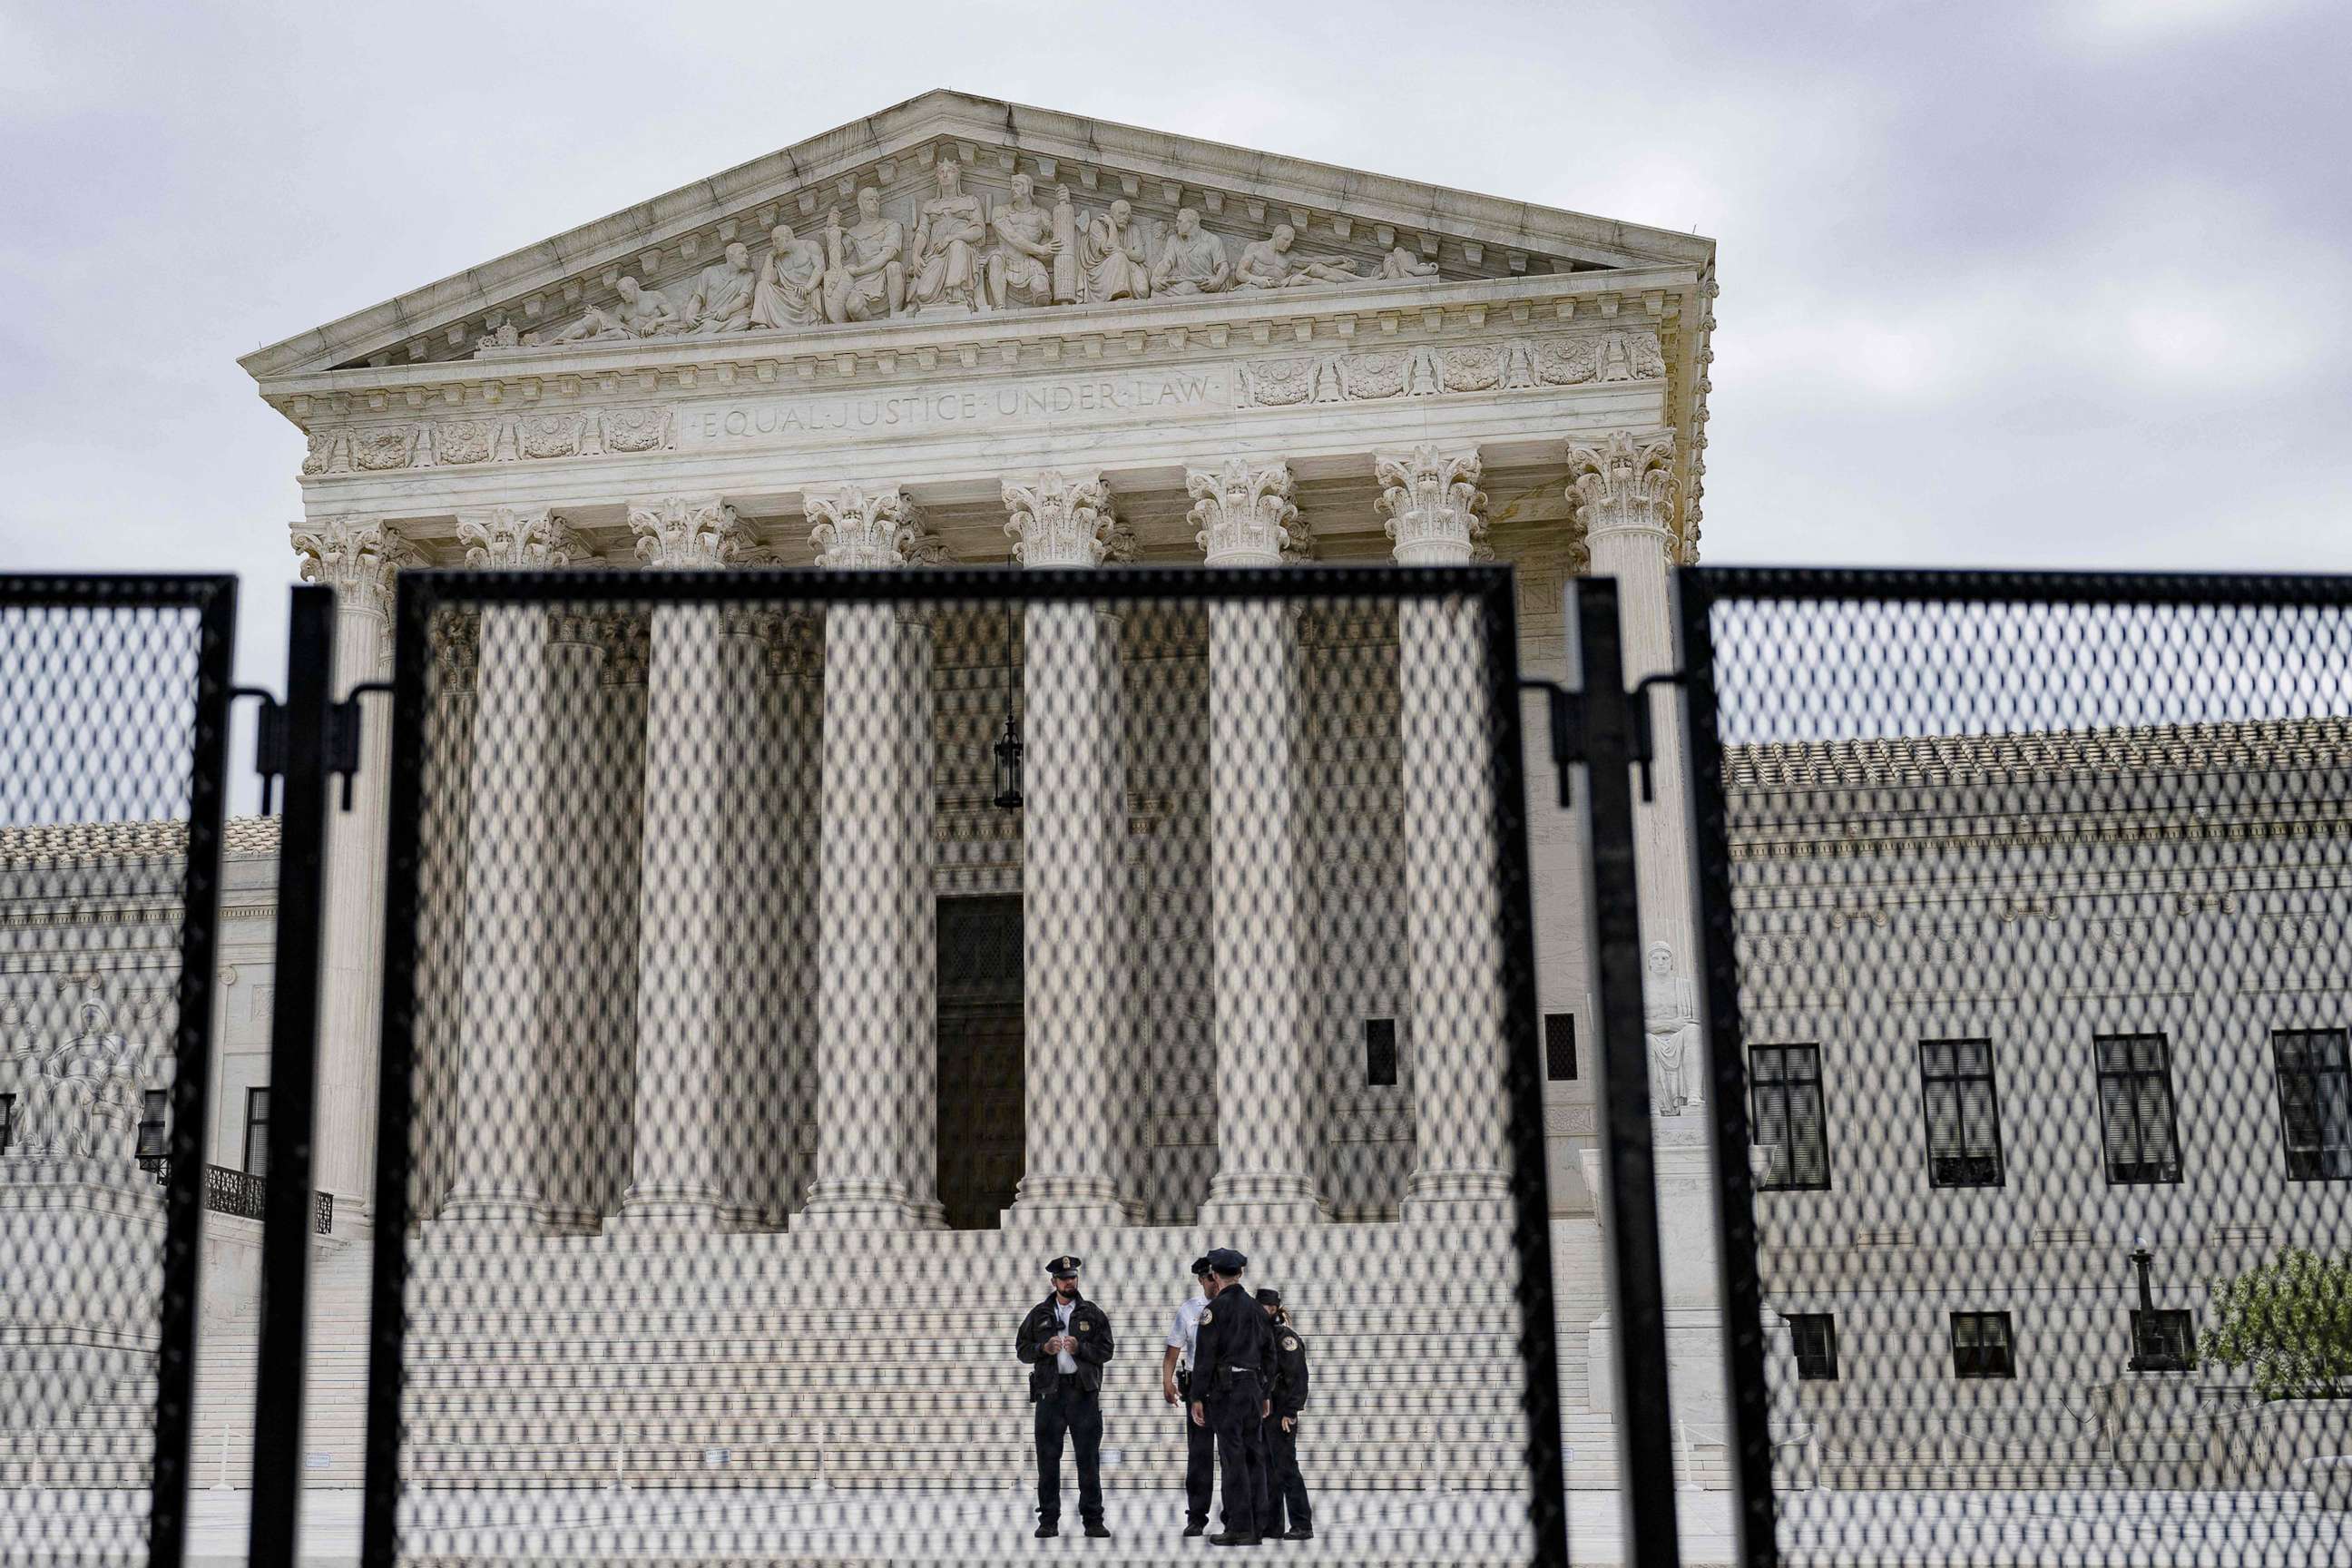 PHOTO: Police officers patrol near an un-scalable fence that stands around the U.S. Supreme Court in Washington, D.C., on May 5, 2022. The fencing is being set up due to the protests in response to the leaked draft of a majority opinion on abortion.